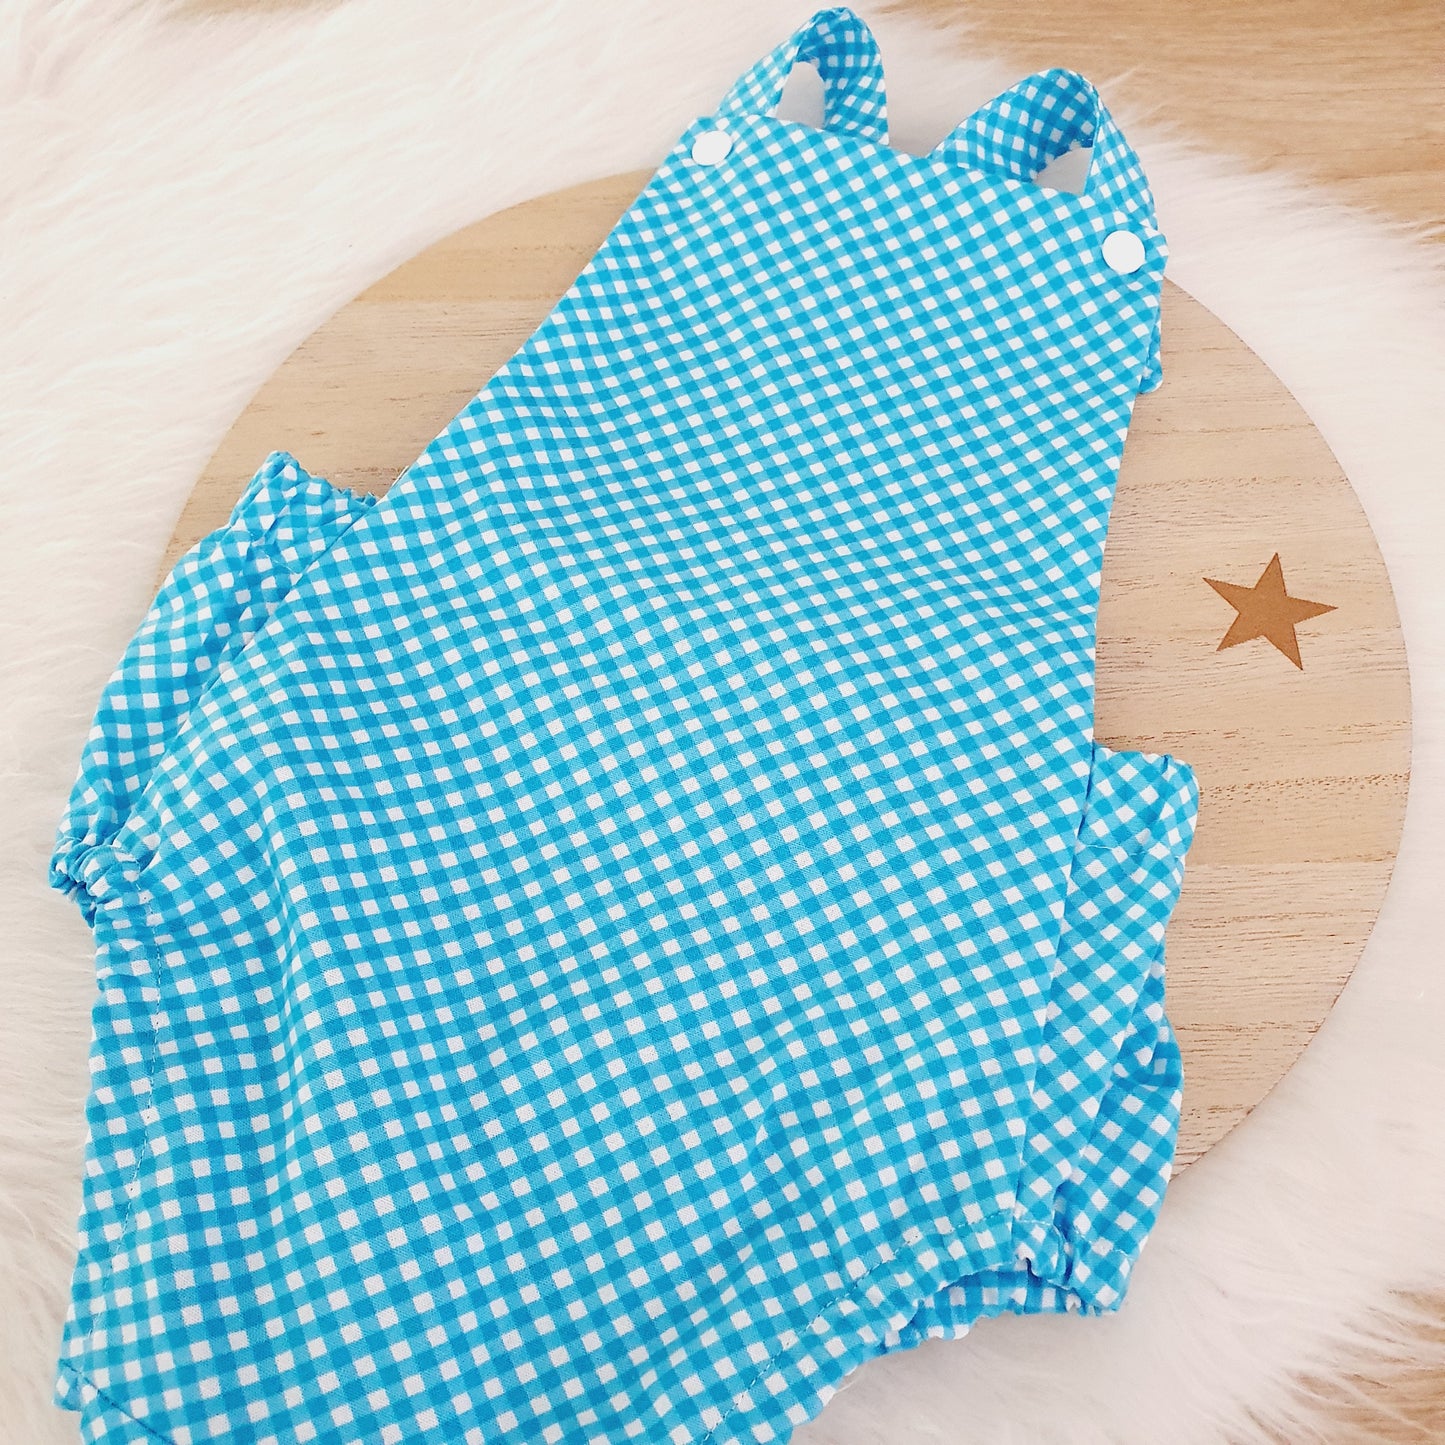 BRIGHT BLUE GINGHAM Baby Romper, Handmade Baby Clothing, Size 1 - 1st Birthday Clothing / Cake Smash Outfit, 12 - 18 months